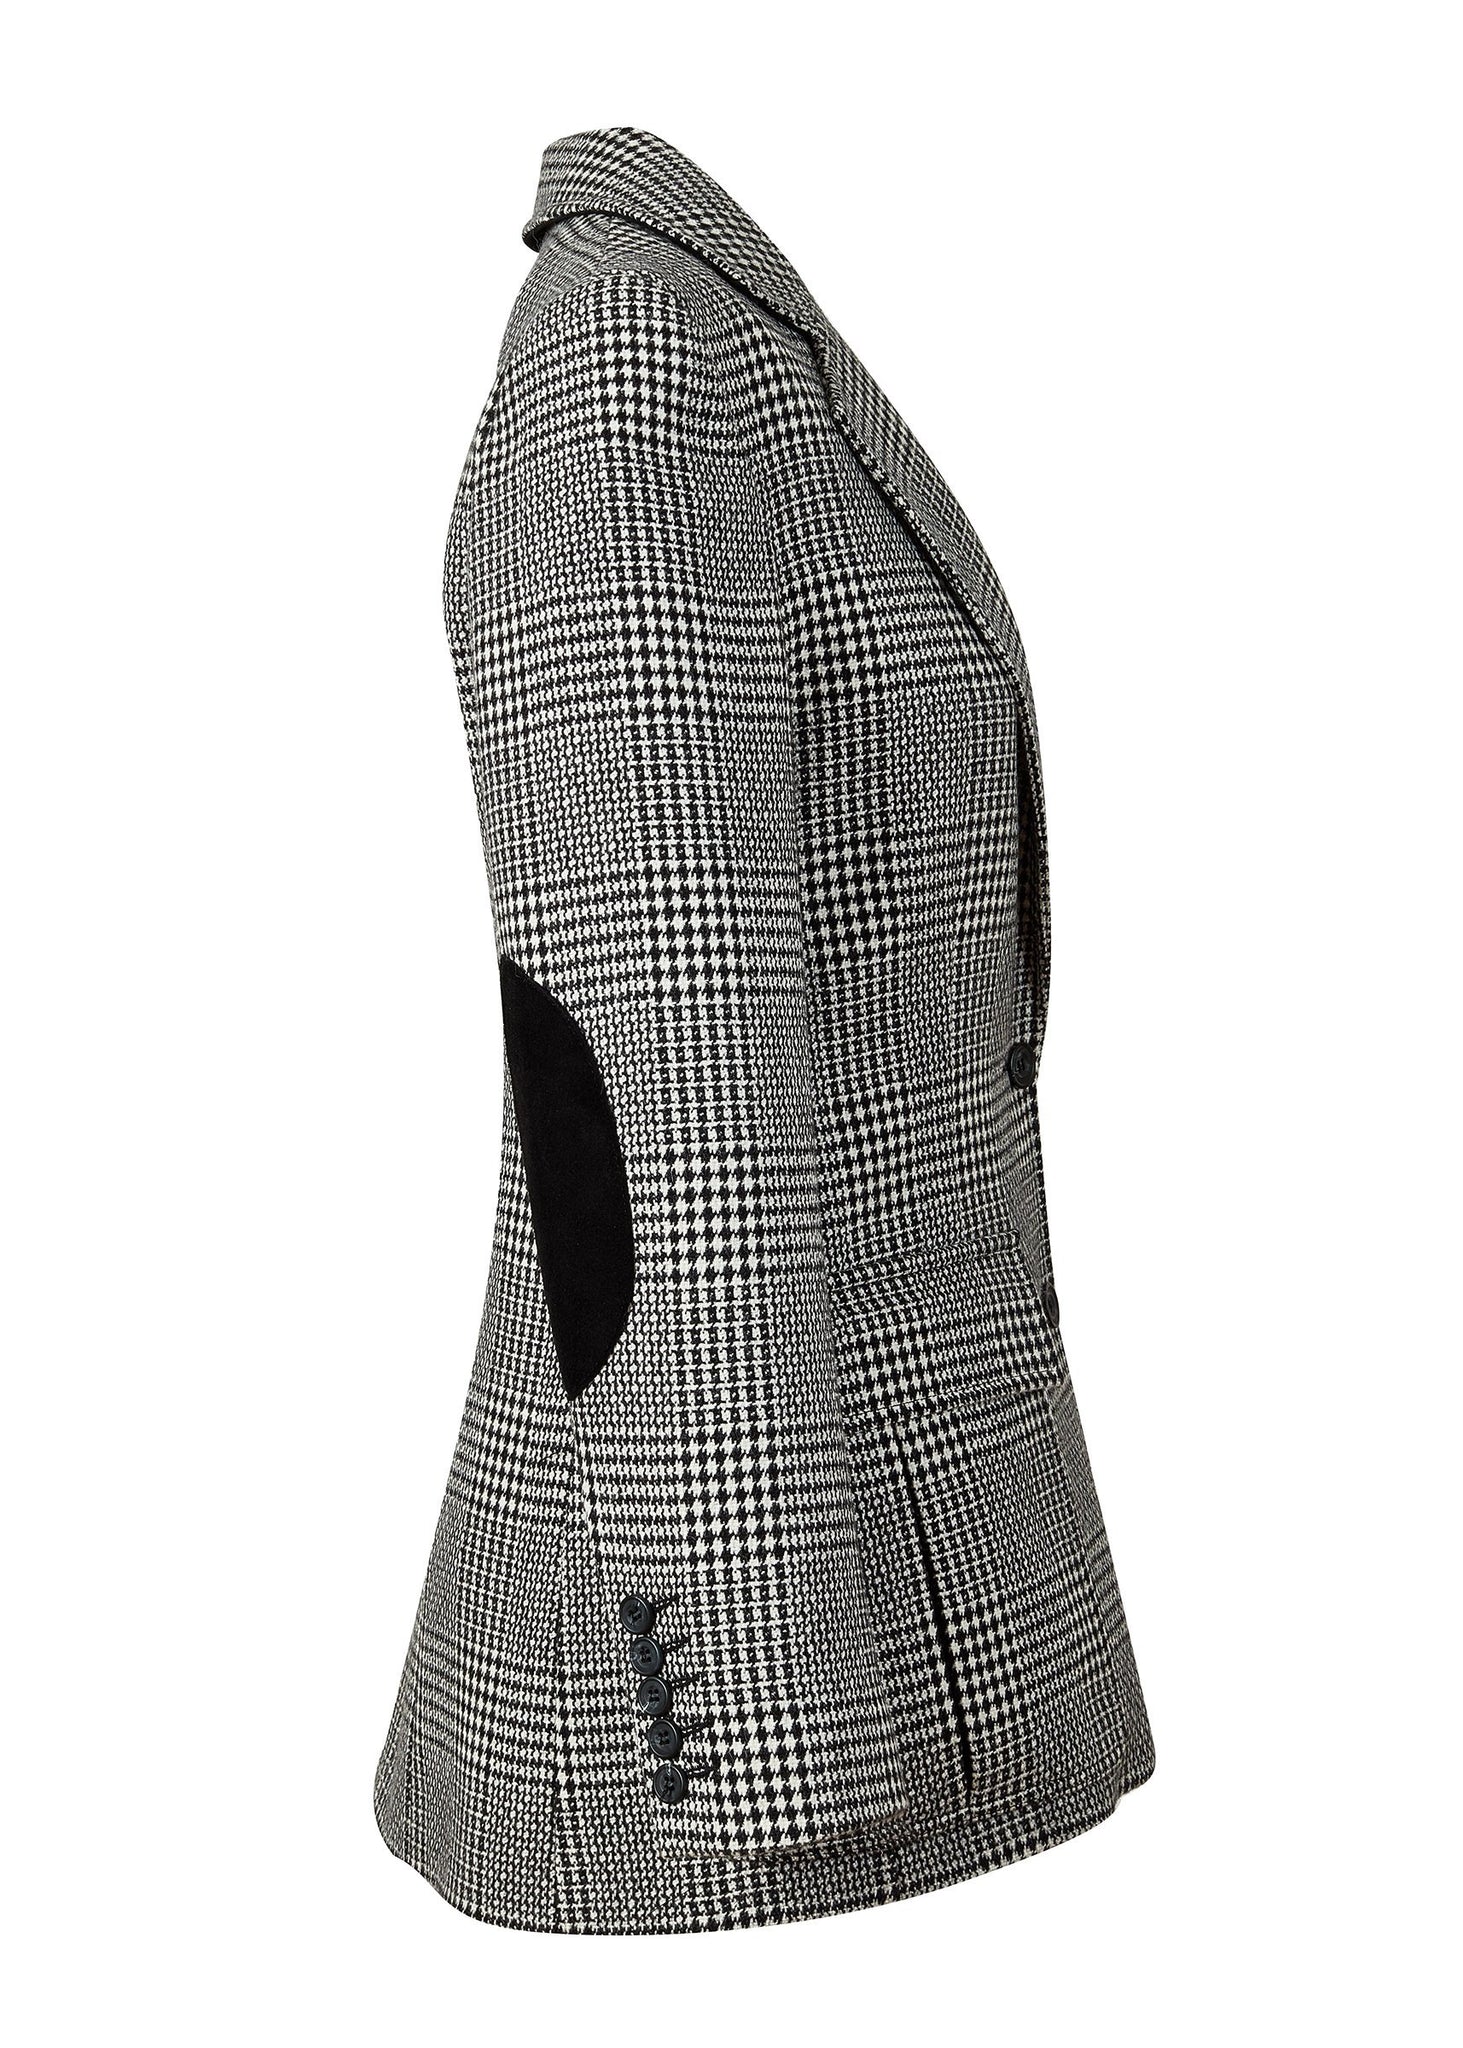 side of womens tailored fit single breasted blazer in black and white check with patch pockets and contrast black suede elbow patches and underside collar